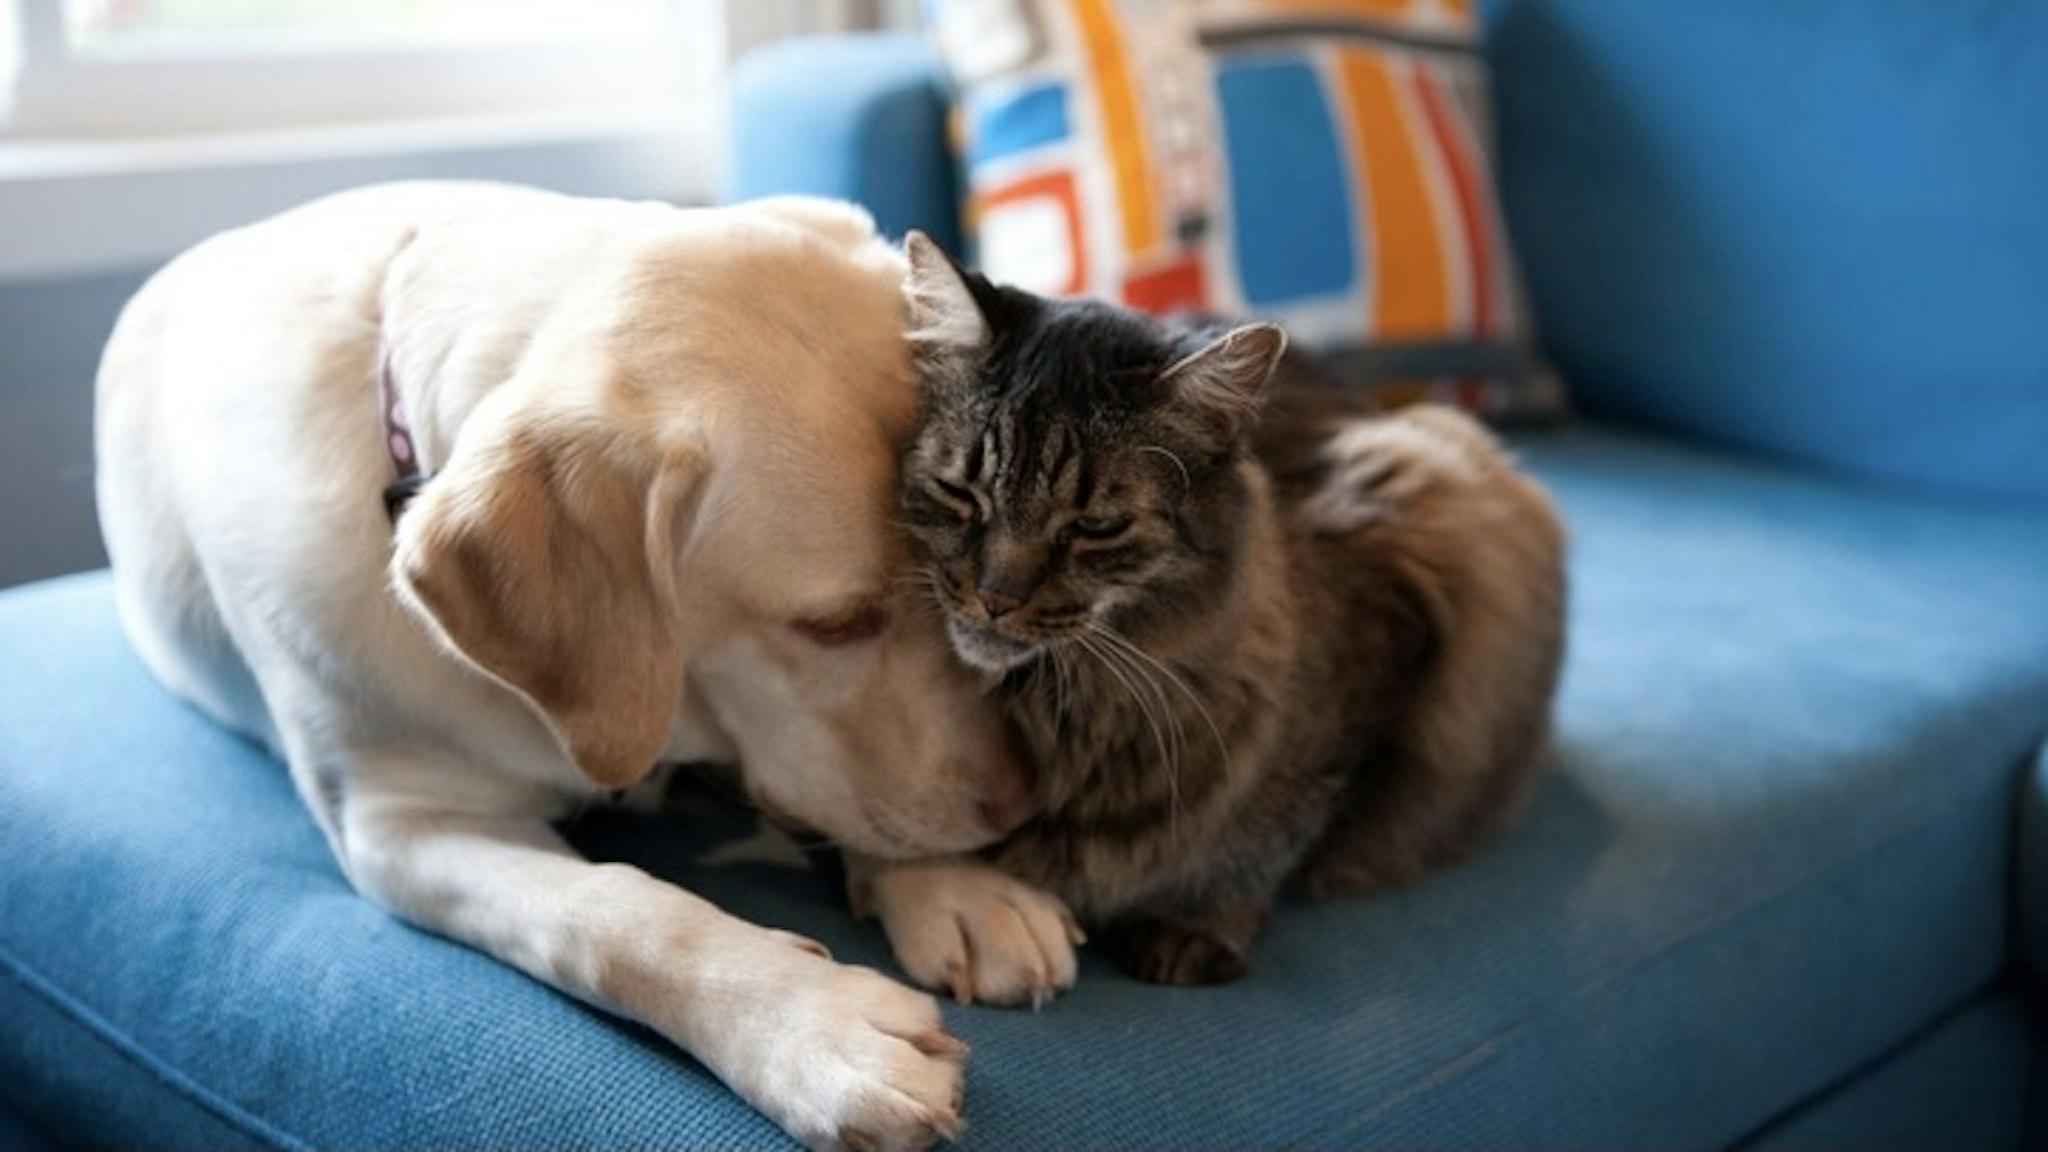 Dog and cat - stock photo Yellow Labrador retriever and Maine coon cat cuddling together on a blue couch. Kimberlee Reimer via Getty Images